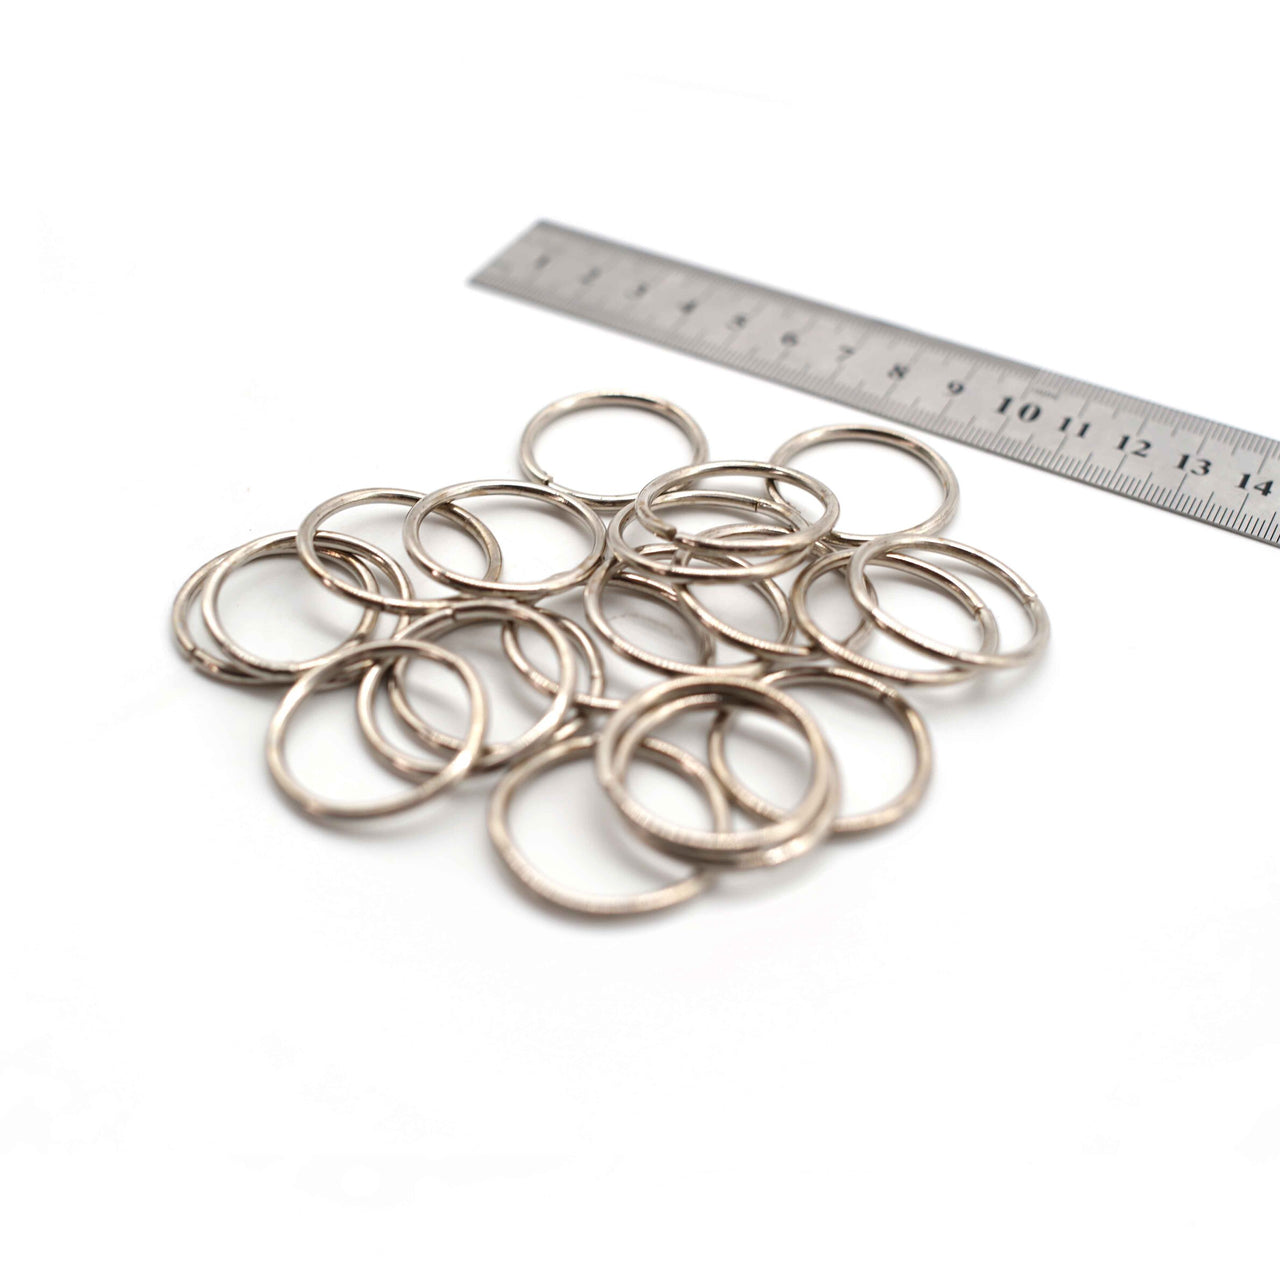 O Rings - 30mm - Silver - Pack of 10 (Thin)